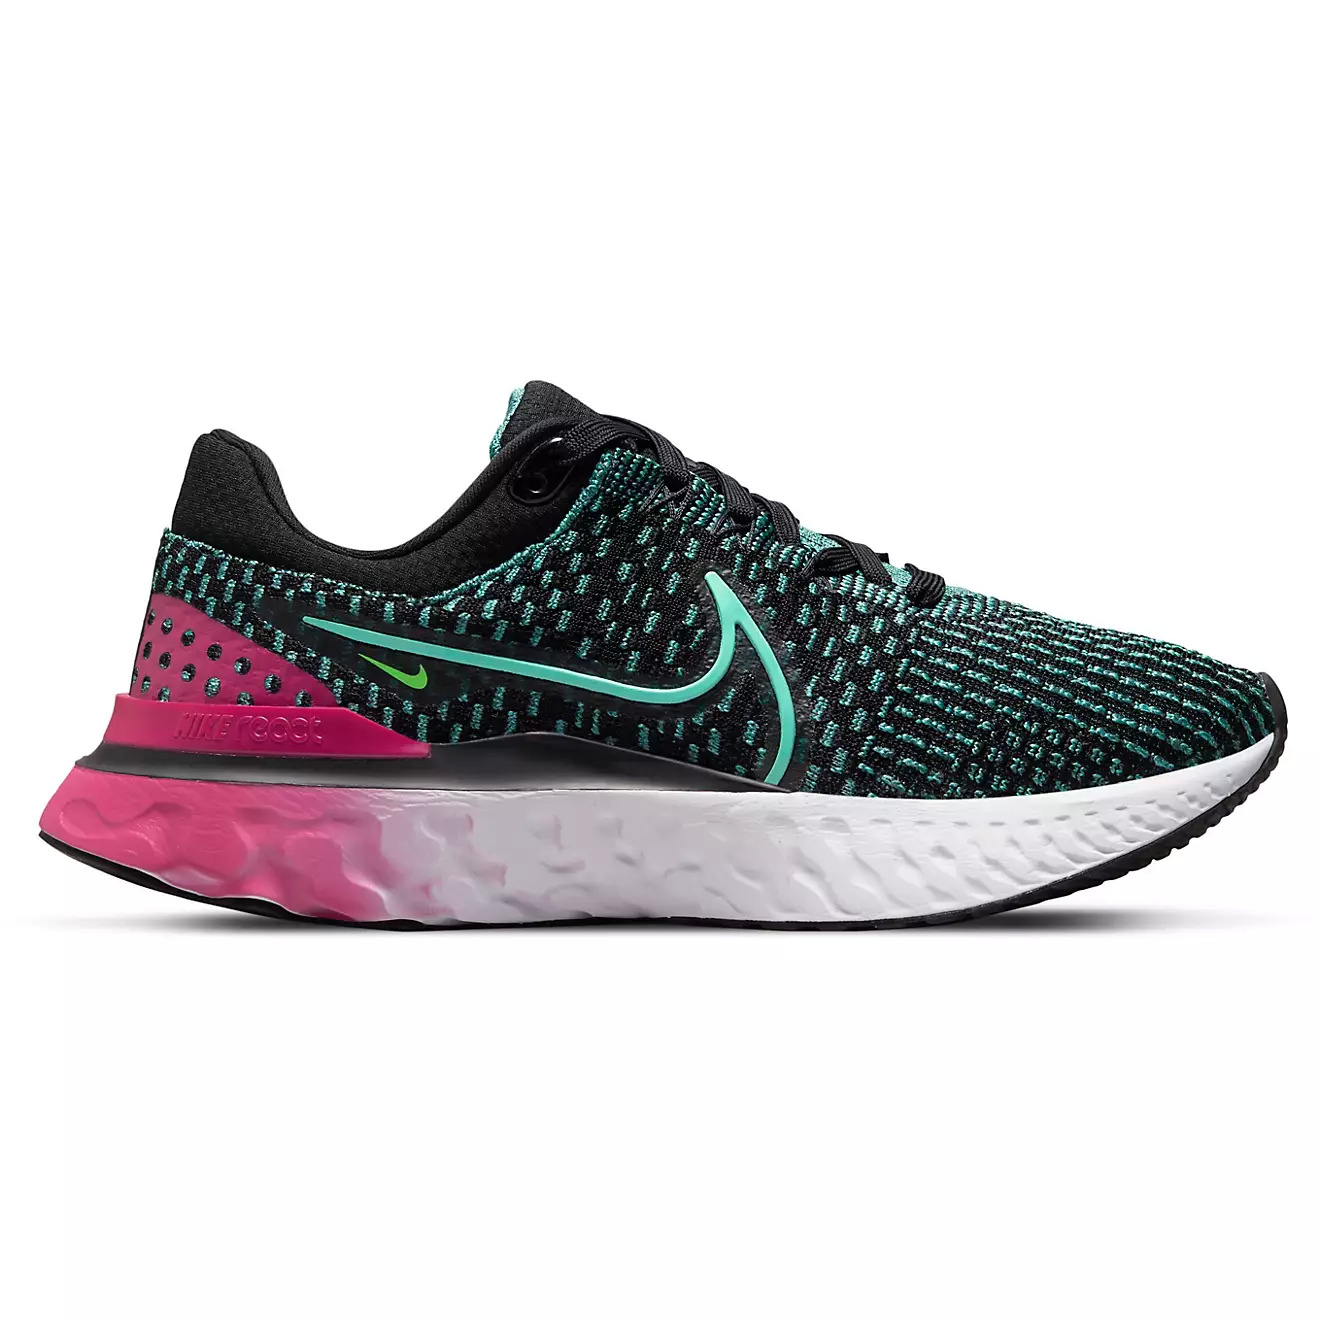 Nike Women's React Infinity Flyknit 3 Running Shoes (Black/Bright Pink) size 7-8.5 $47.98